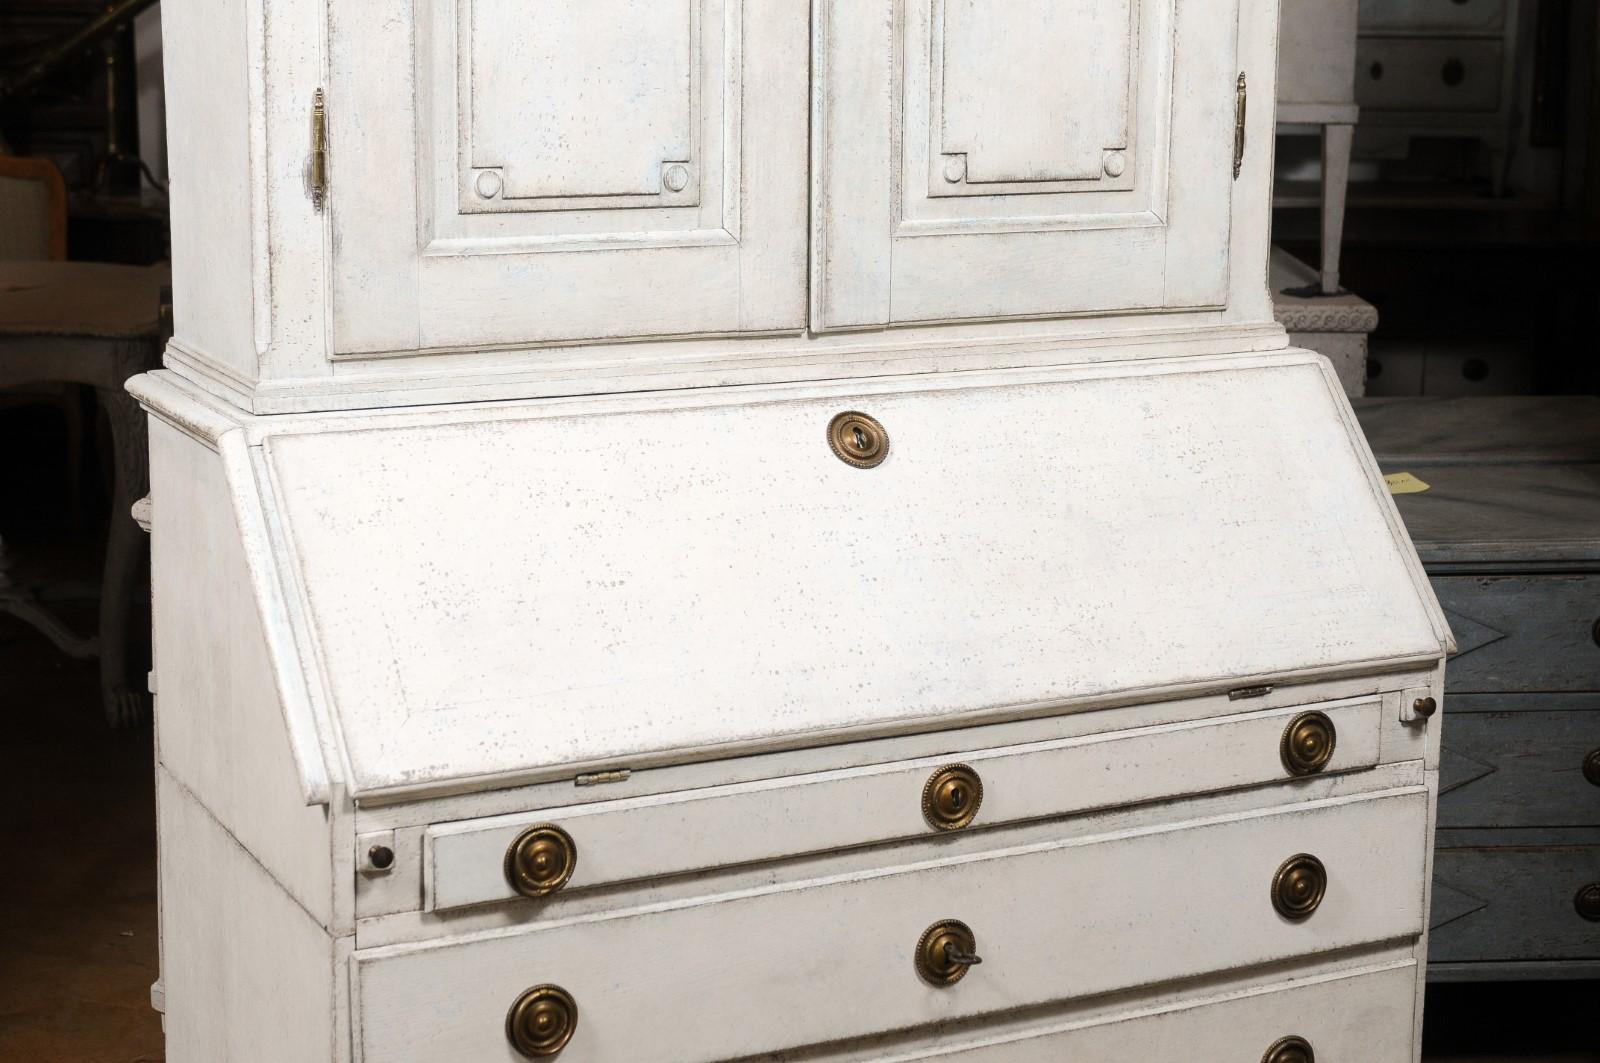 A Swedish Gustavian period two-part secretary from the late 18th century, with carved cornice and slanted front desk. Created in Sweden during the last decade of the 18th century, this Gustavian painted wood tall secretary features a carved cornice